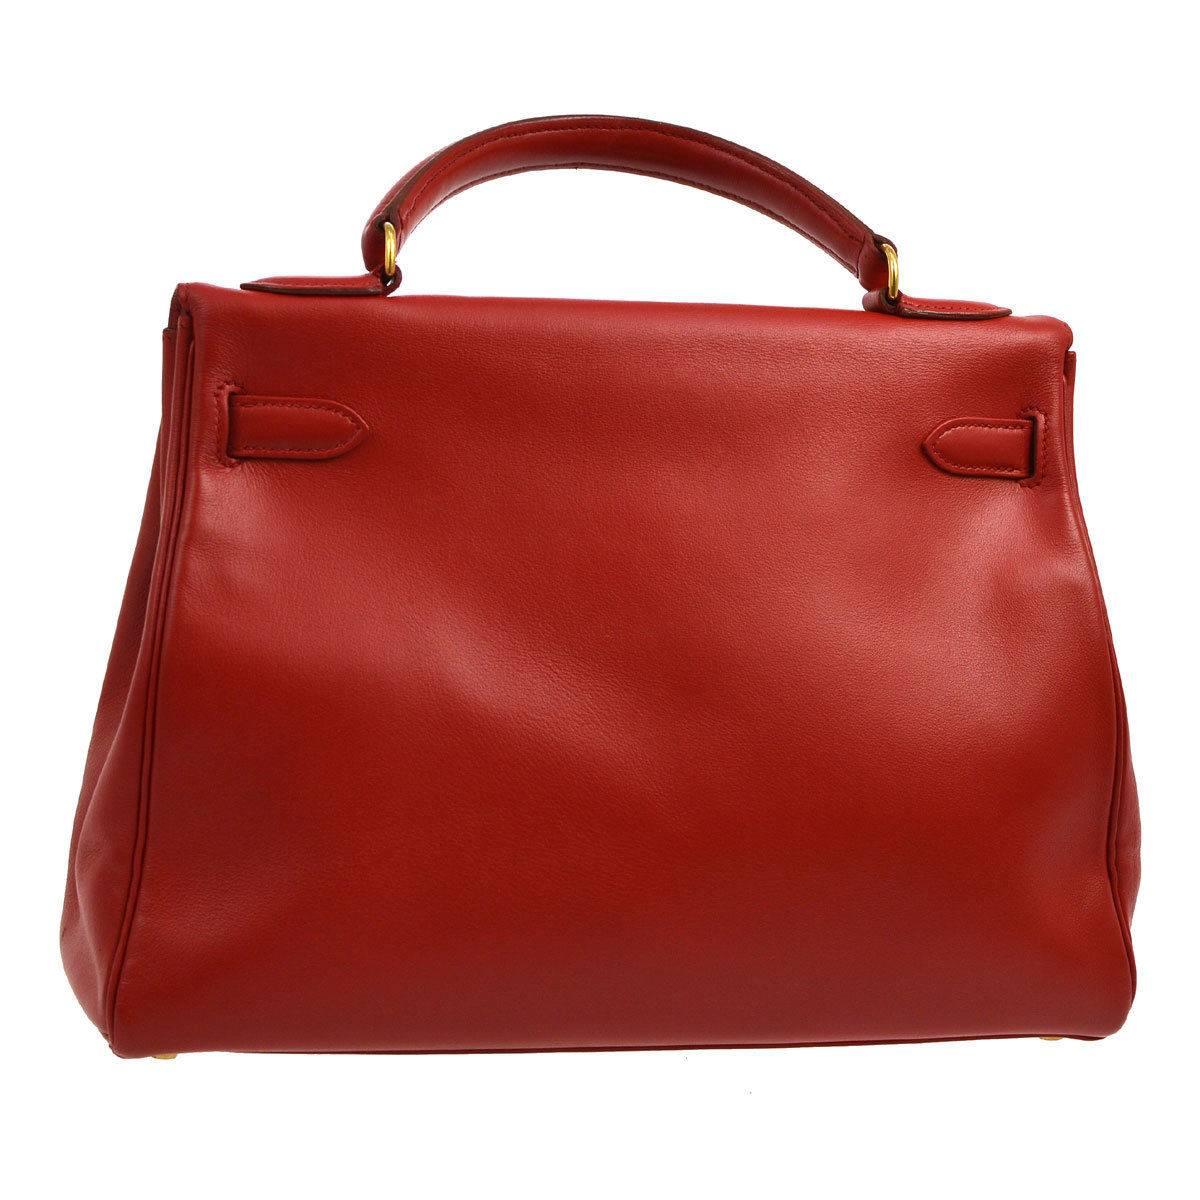 Women's Hermes Kelly 32 Rouge Red Leather Evening Top Handle Satchel Flap Bag in Box